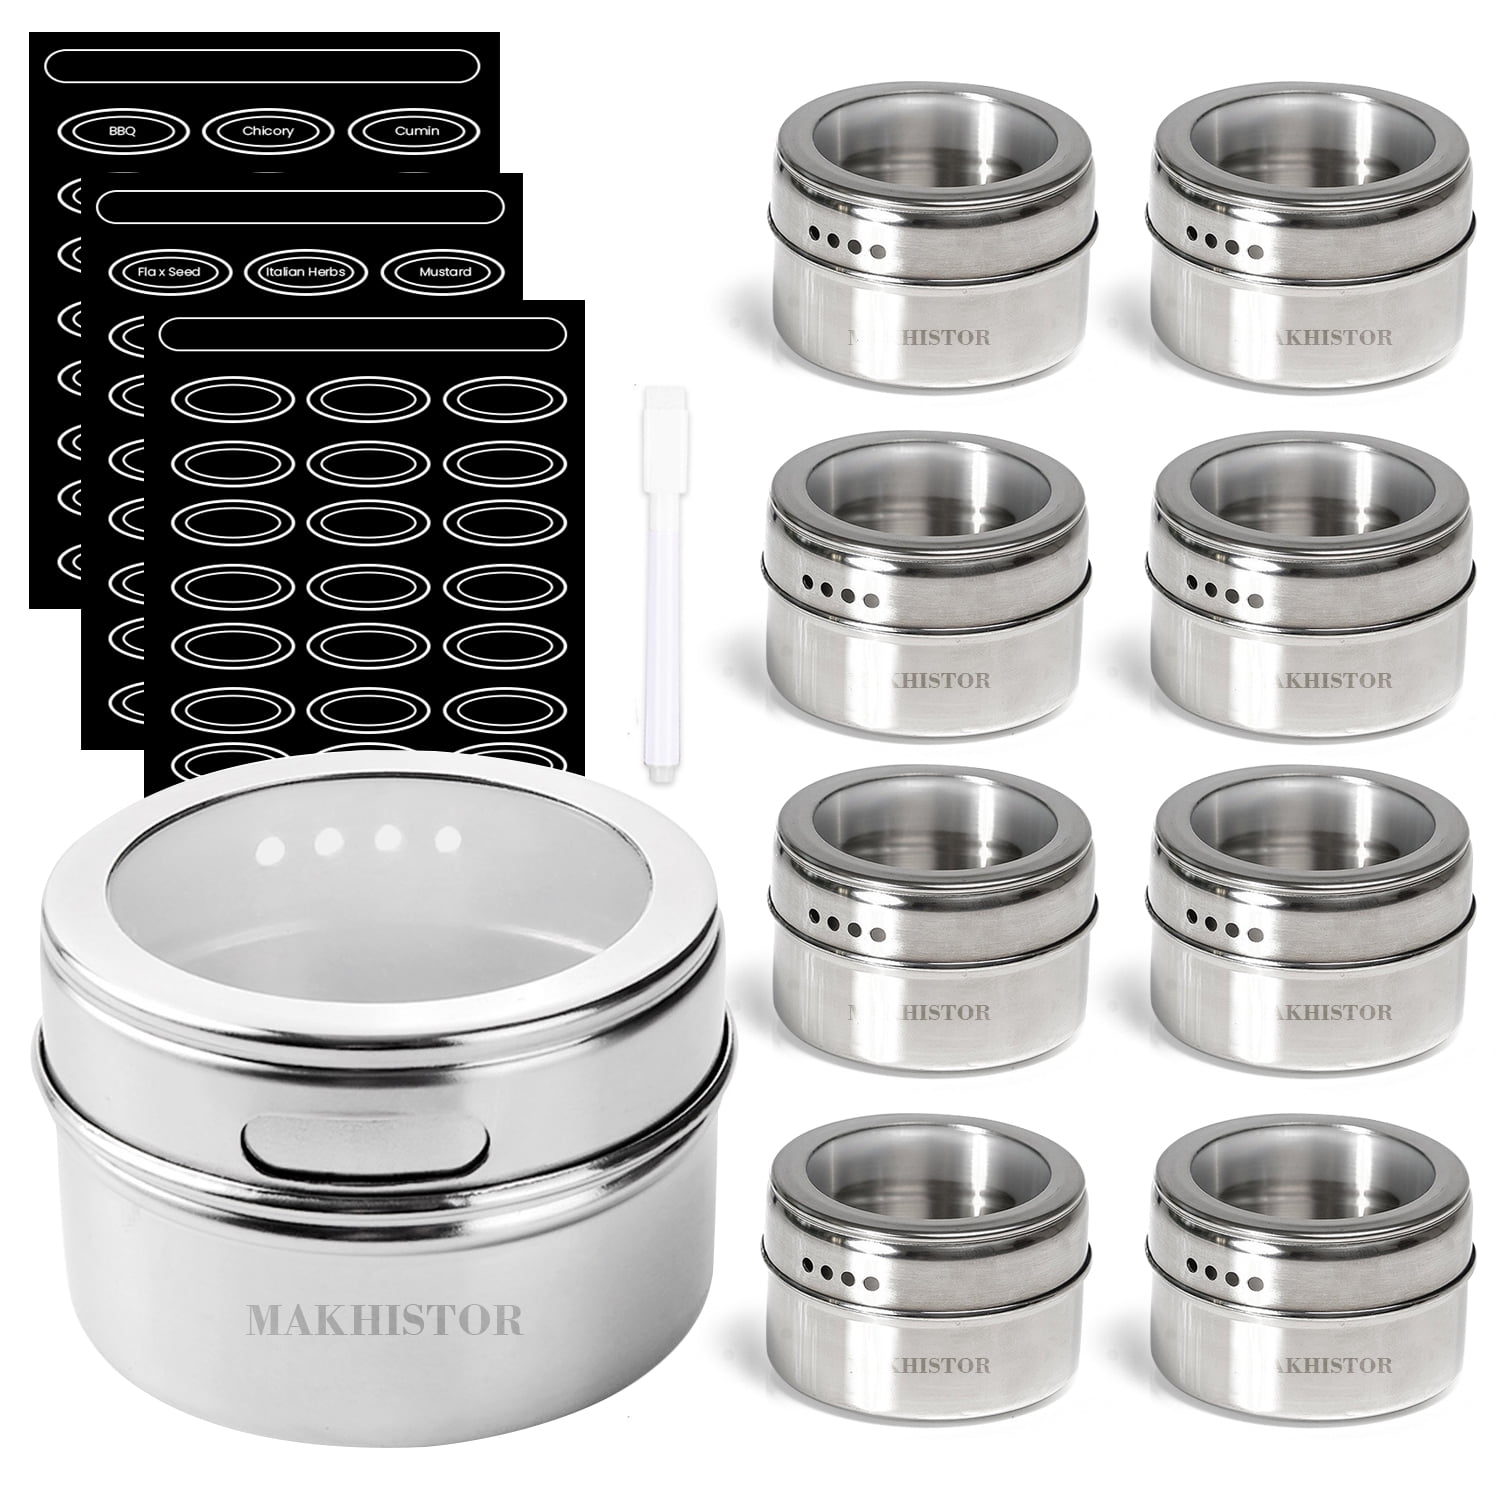  NETANY 25 Pcs Spice Jars with Labels and Shaker Lids -  Minimalist Stickers, Collapsible Funnel, 4oz Seasoning Containers Bottles  for Spice Rack, Cabinet, Drawer, Glass: Home & Kitchen